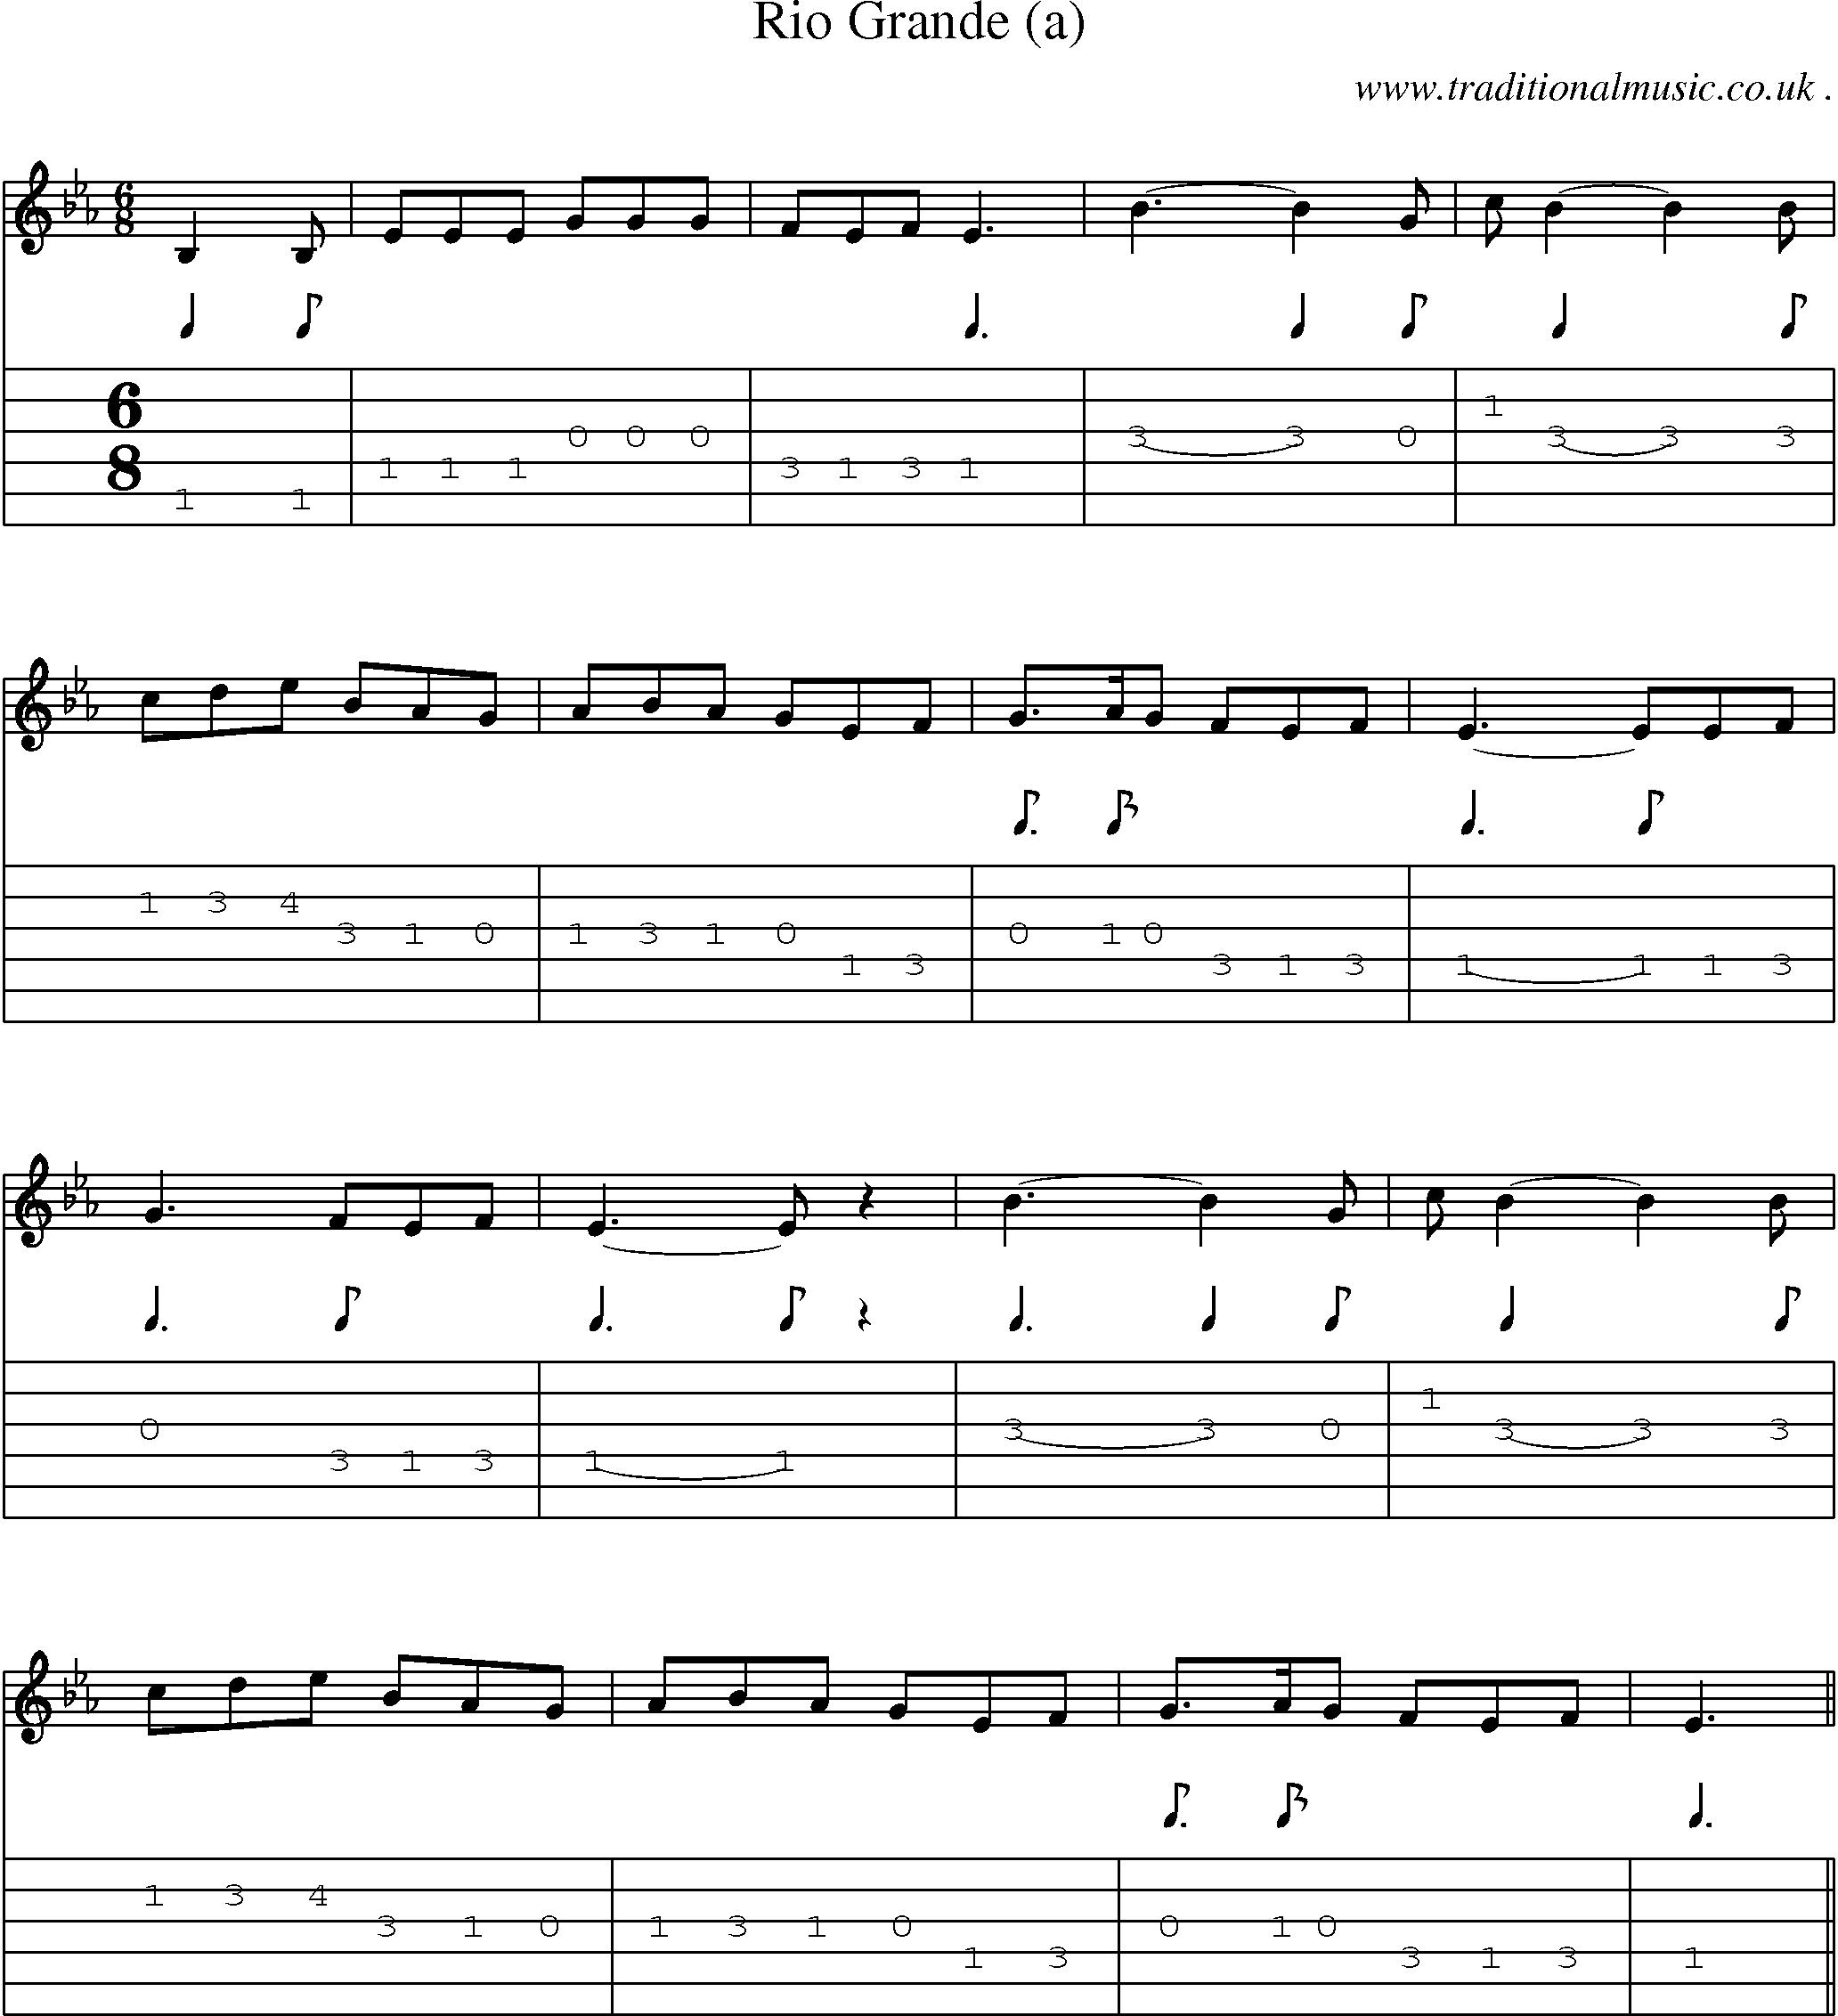 Sheet-Music and Guitar Tabs for Rio Grande (a)